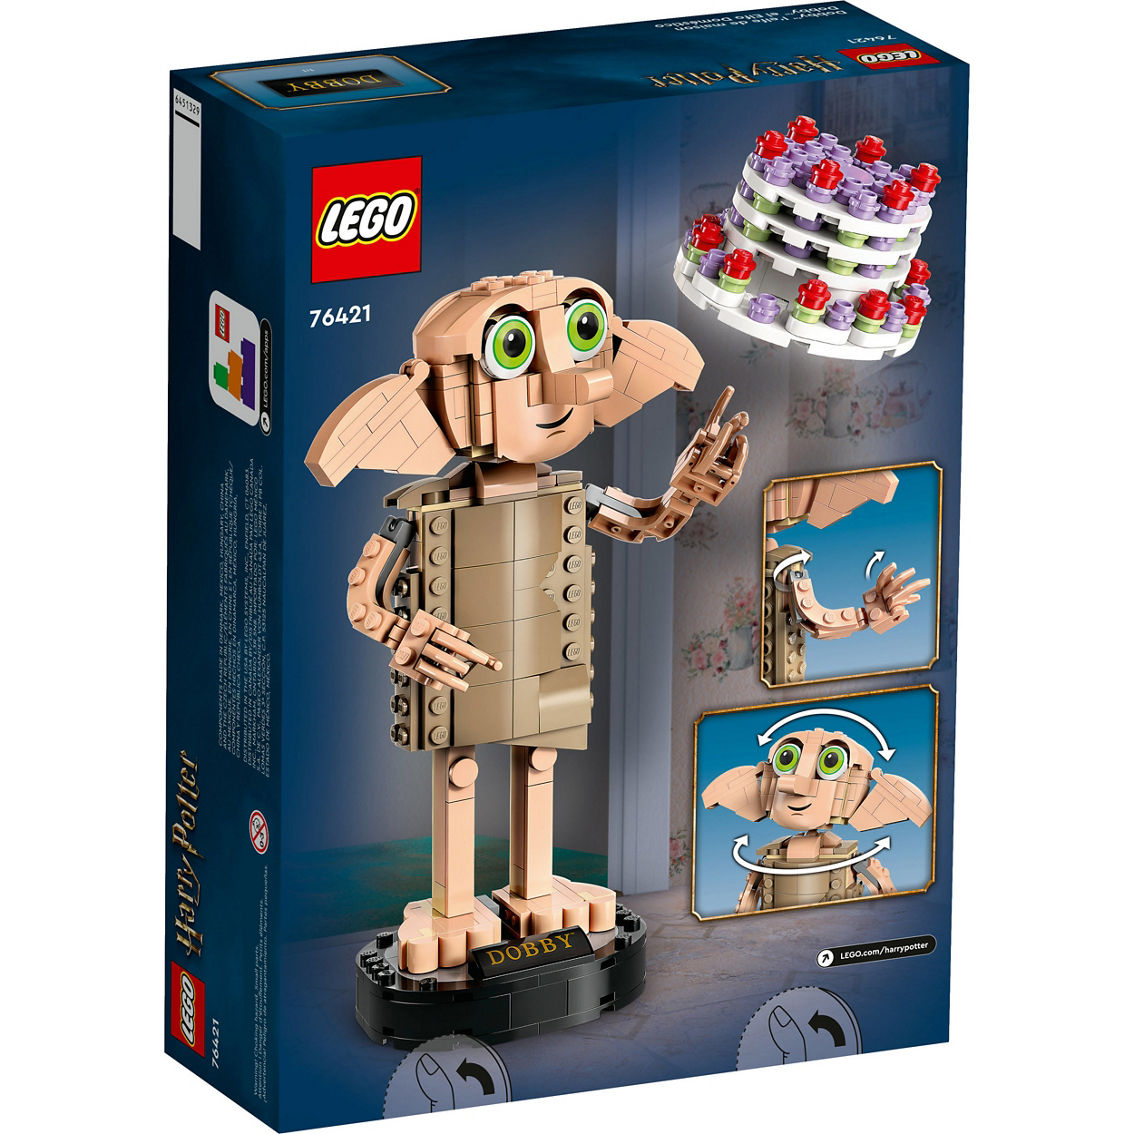 LEGO Harry Potter Dobby the House-Elf Build and Display Set 76421 - Image 2 of 10